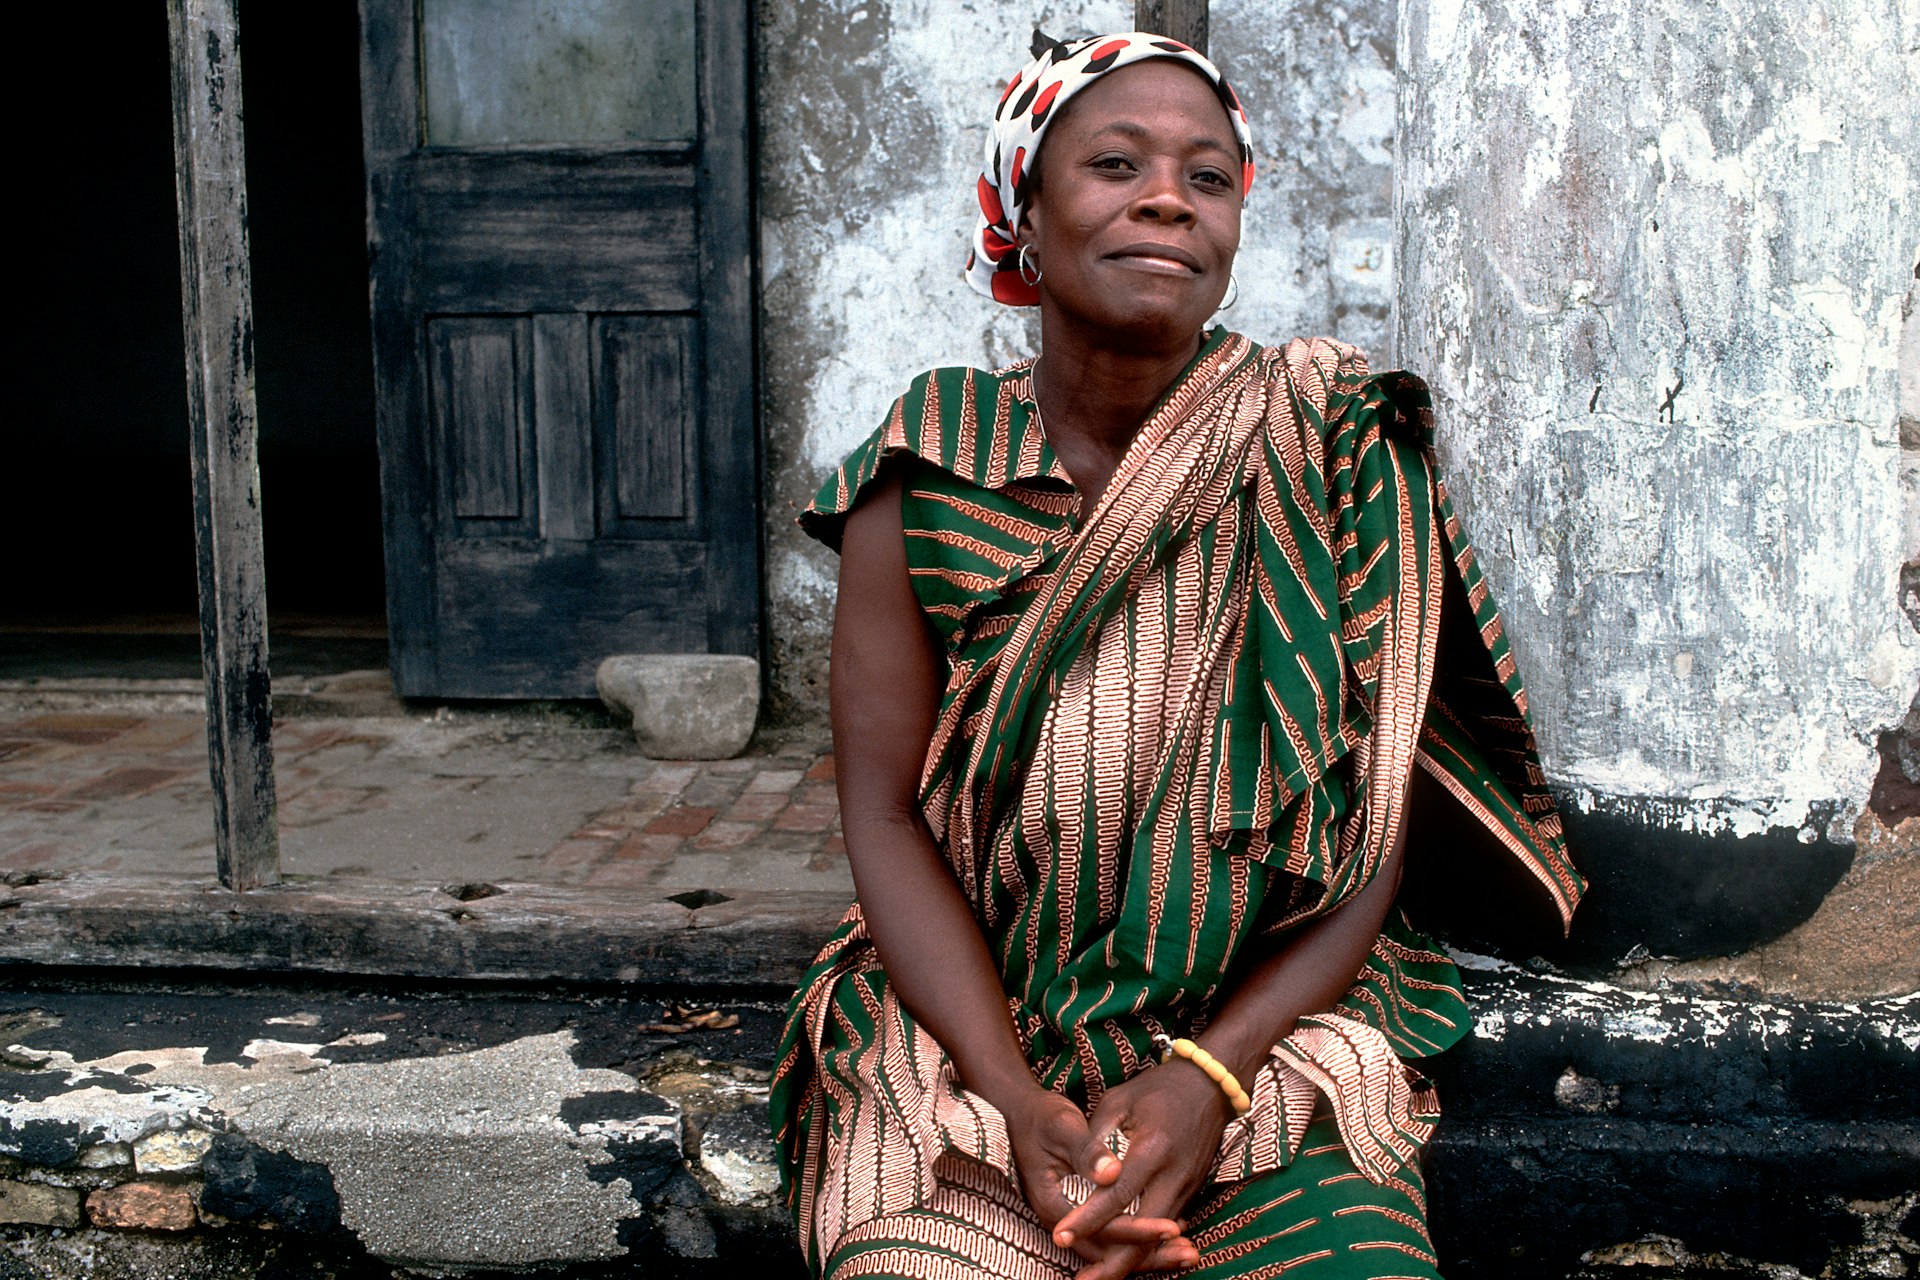 A Ghanaian woman poses for a photo close to Elmina Castle in Ghana.